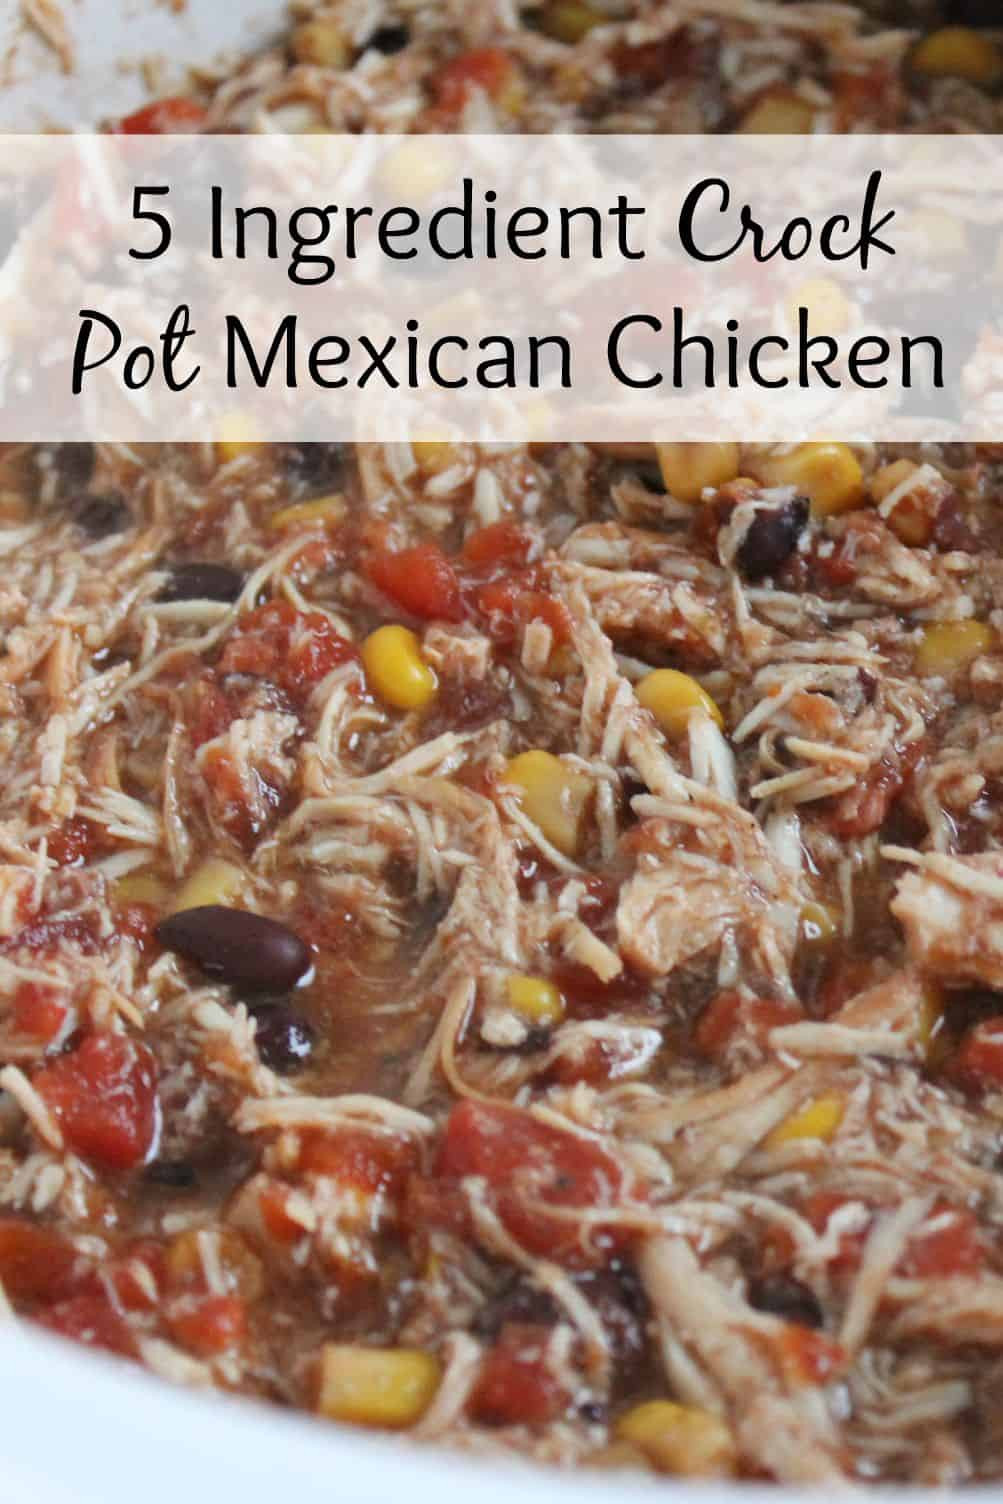 Easy Crockpot Mexican Chicken Recipes to Make at Home